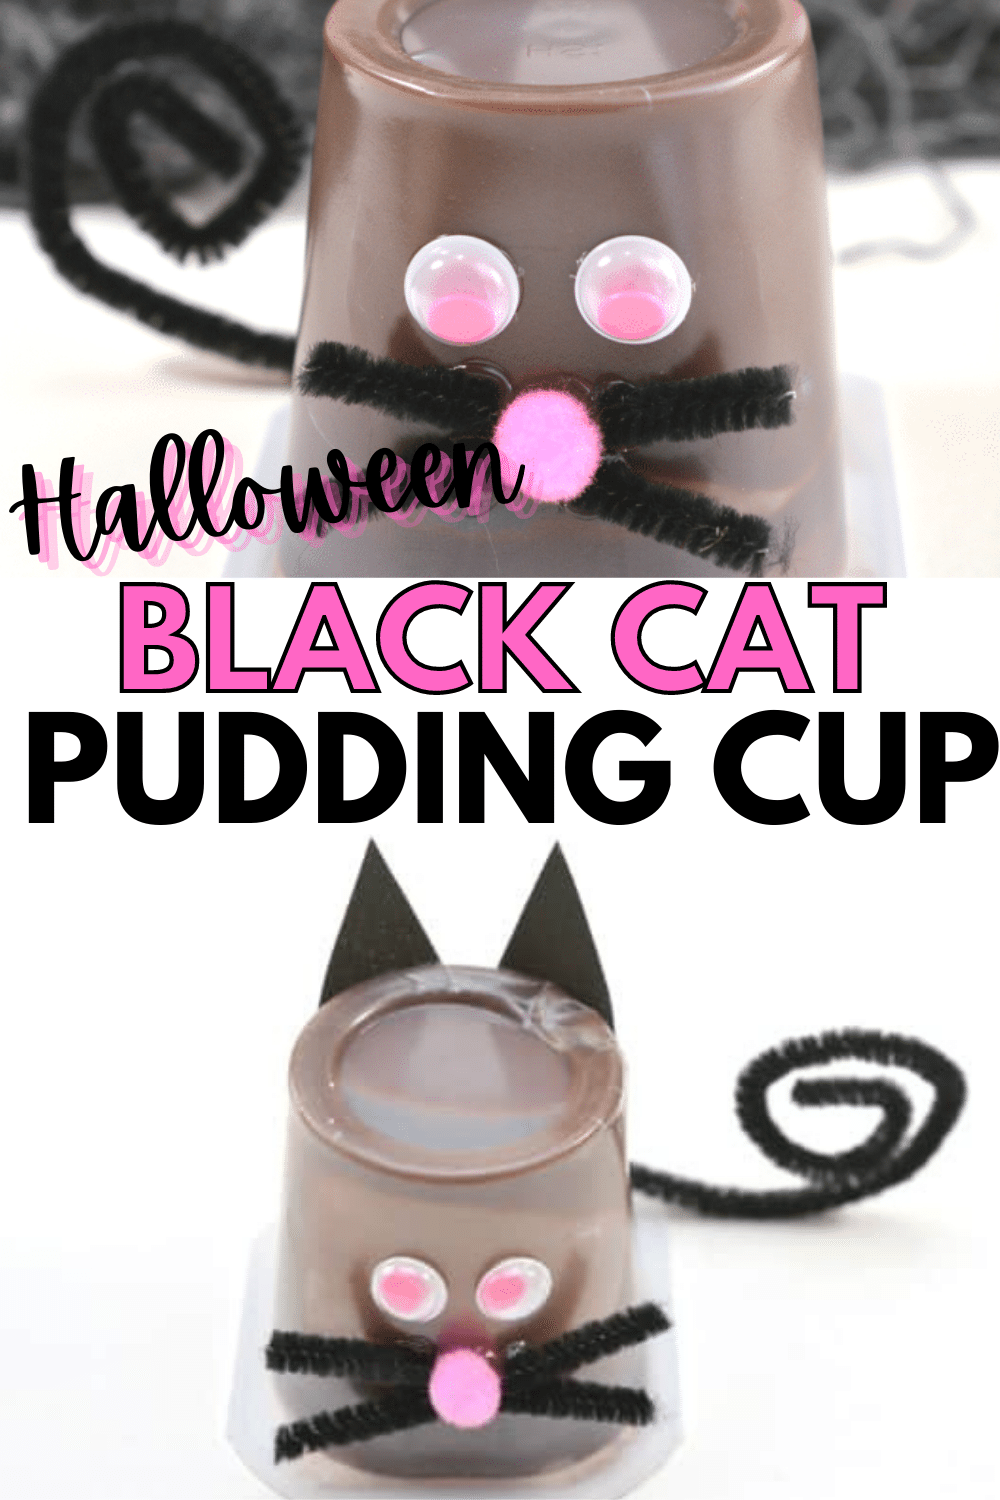 This black cat pudding cup is such a fun Halloween treat idea and it's super easy! #Halloween #treats #crafts #funfood via @wondermomwannab